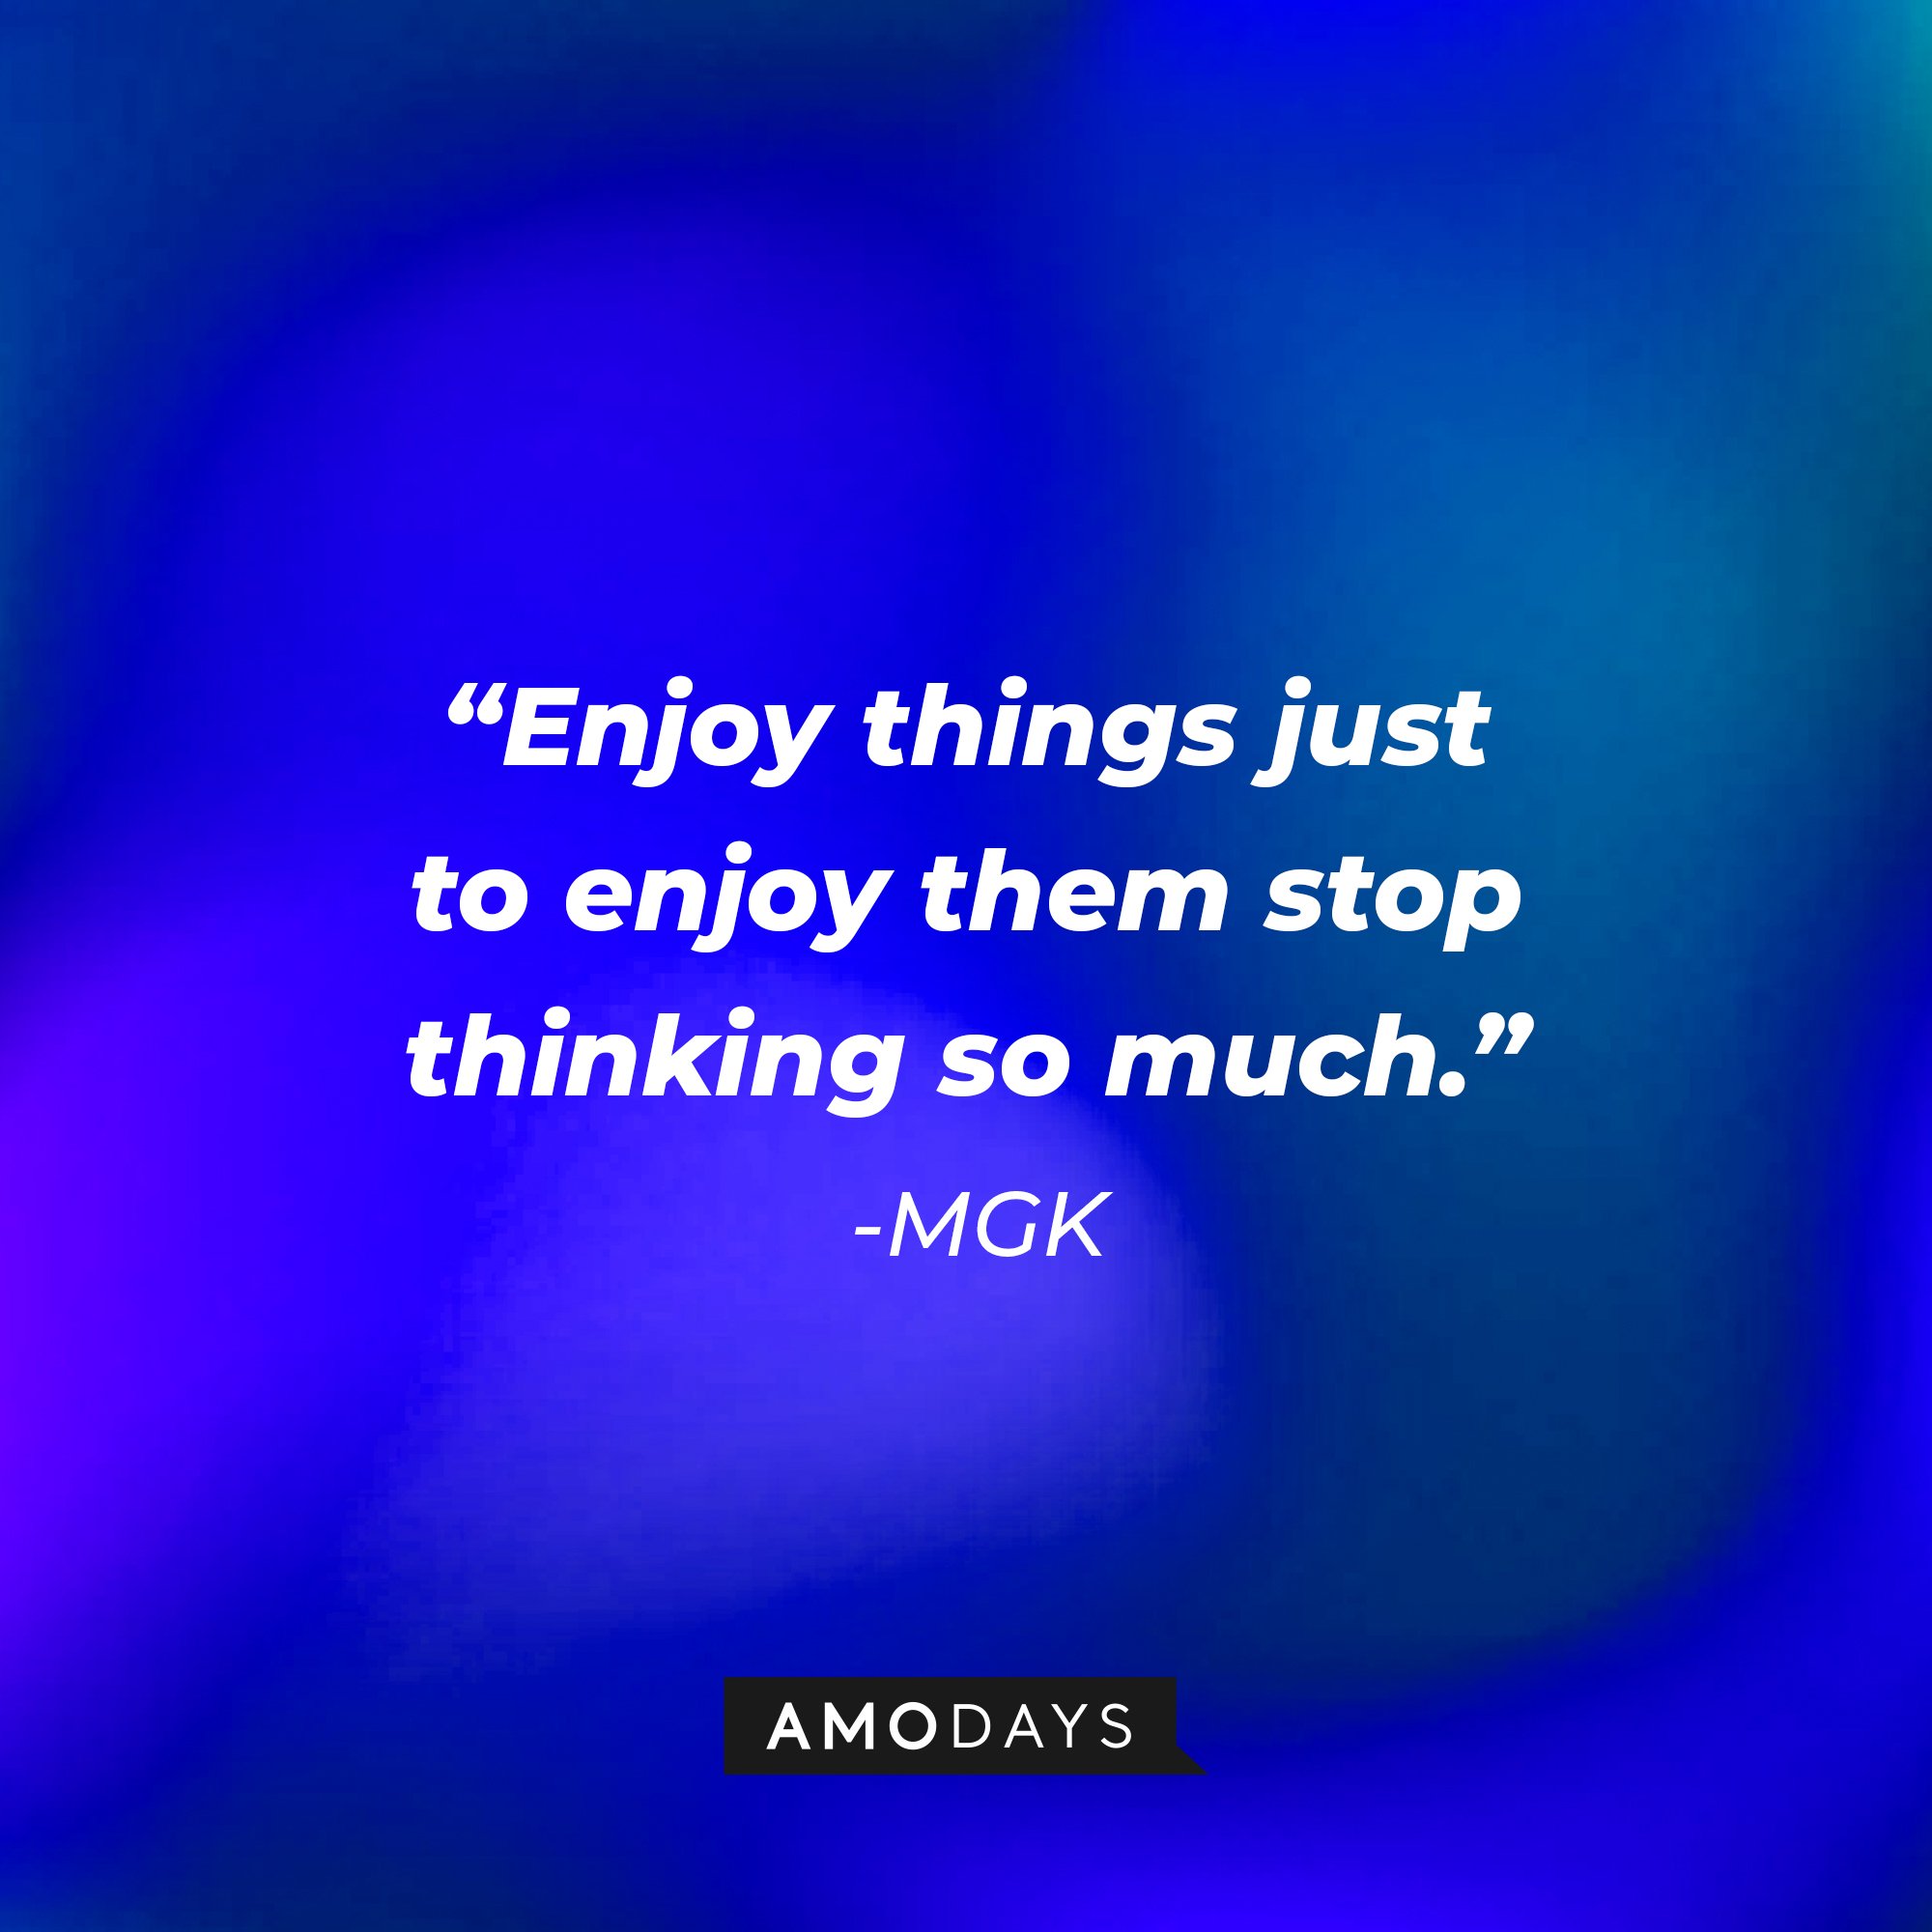 MGK's quote: "Enjoy things just to enjoy them stop thinking so much." | Image: AmoDays